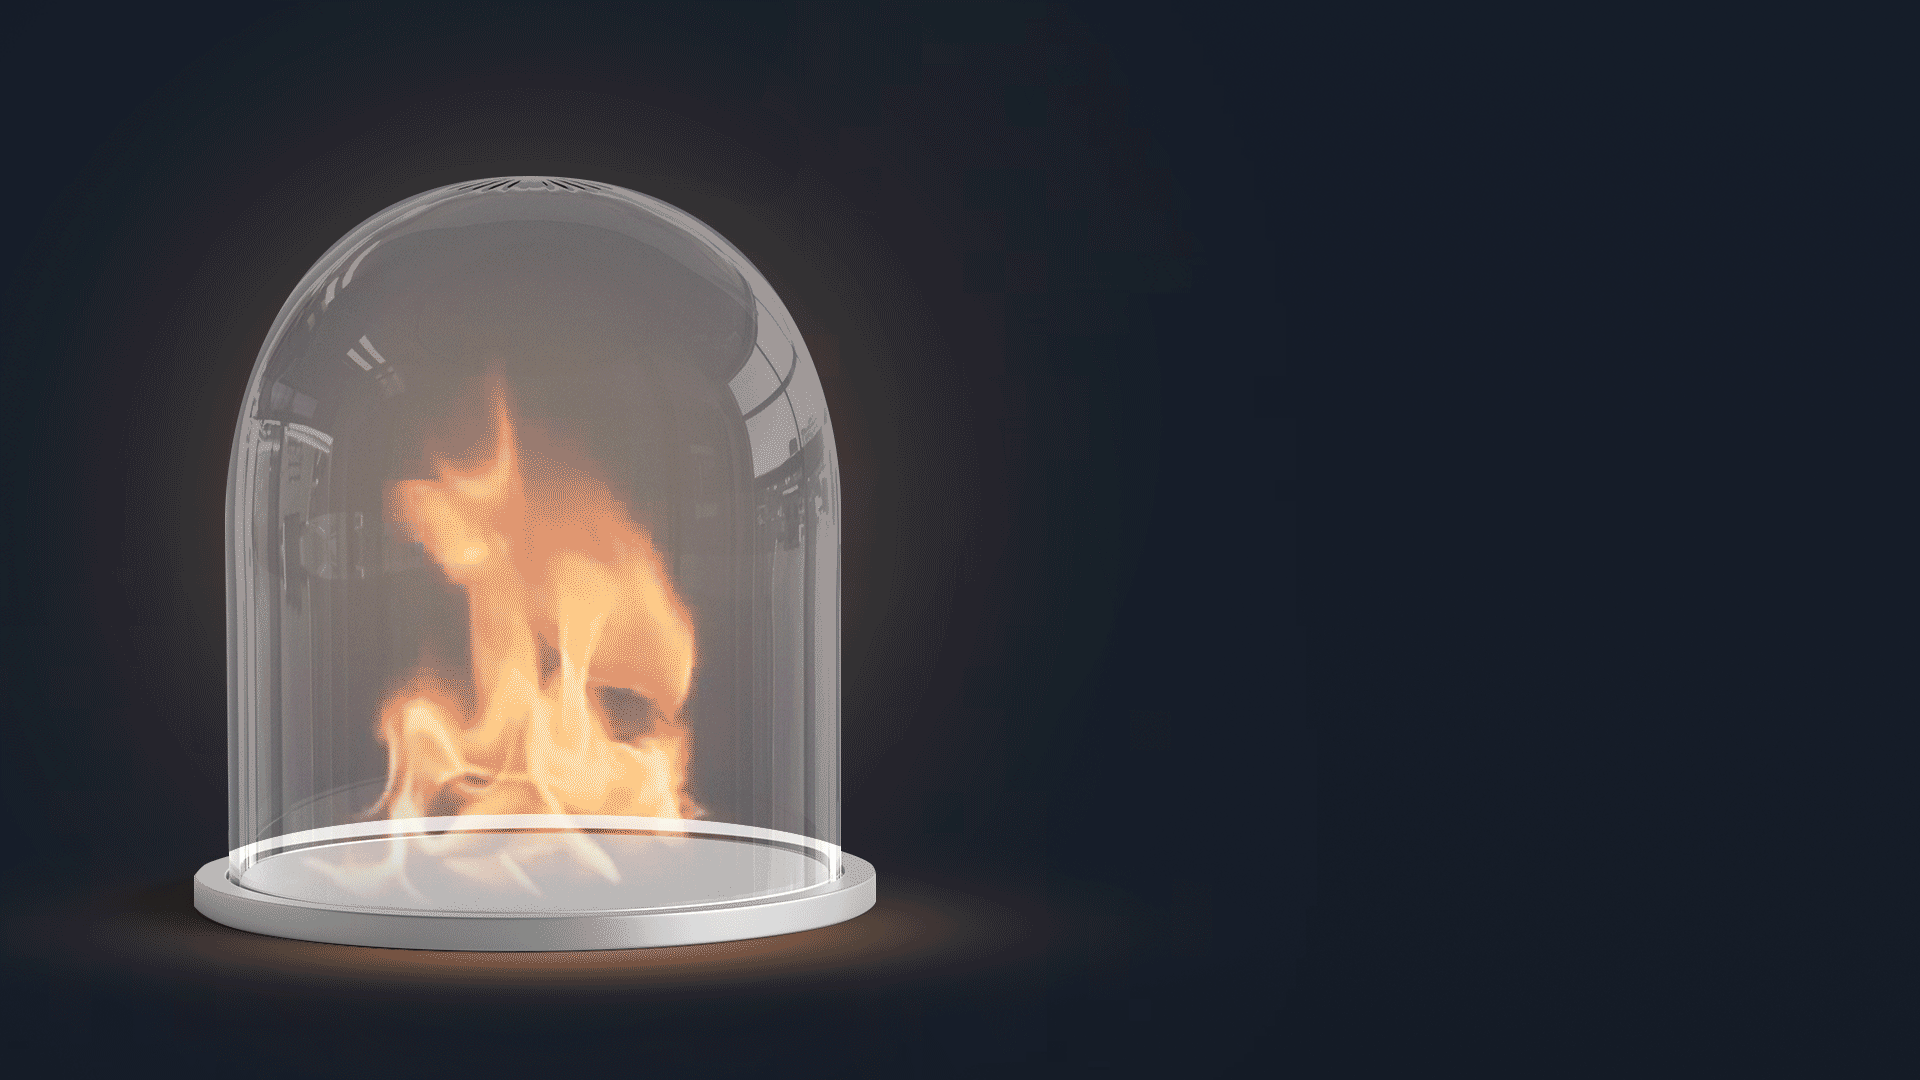 Animated illustration of fire under a glass dome. 